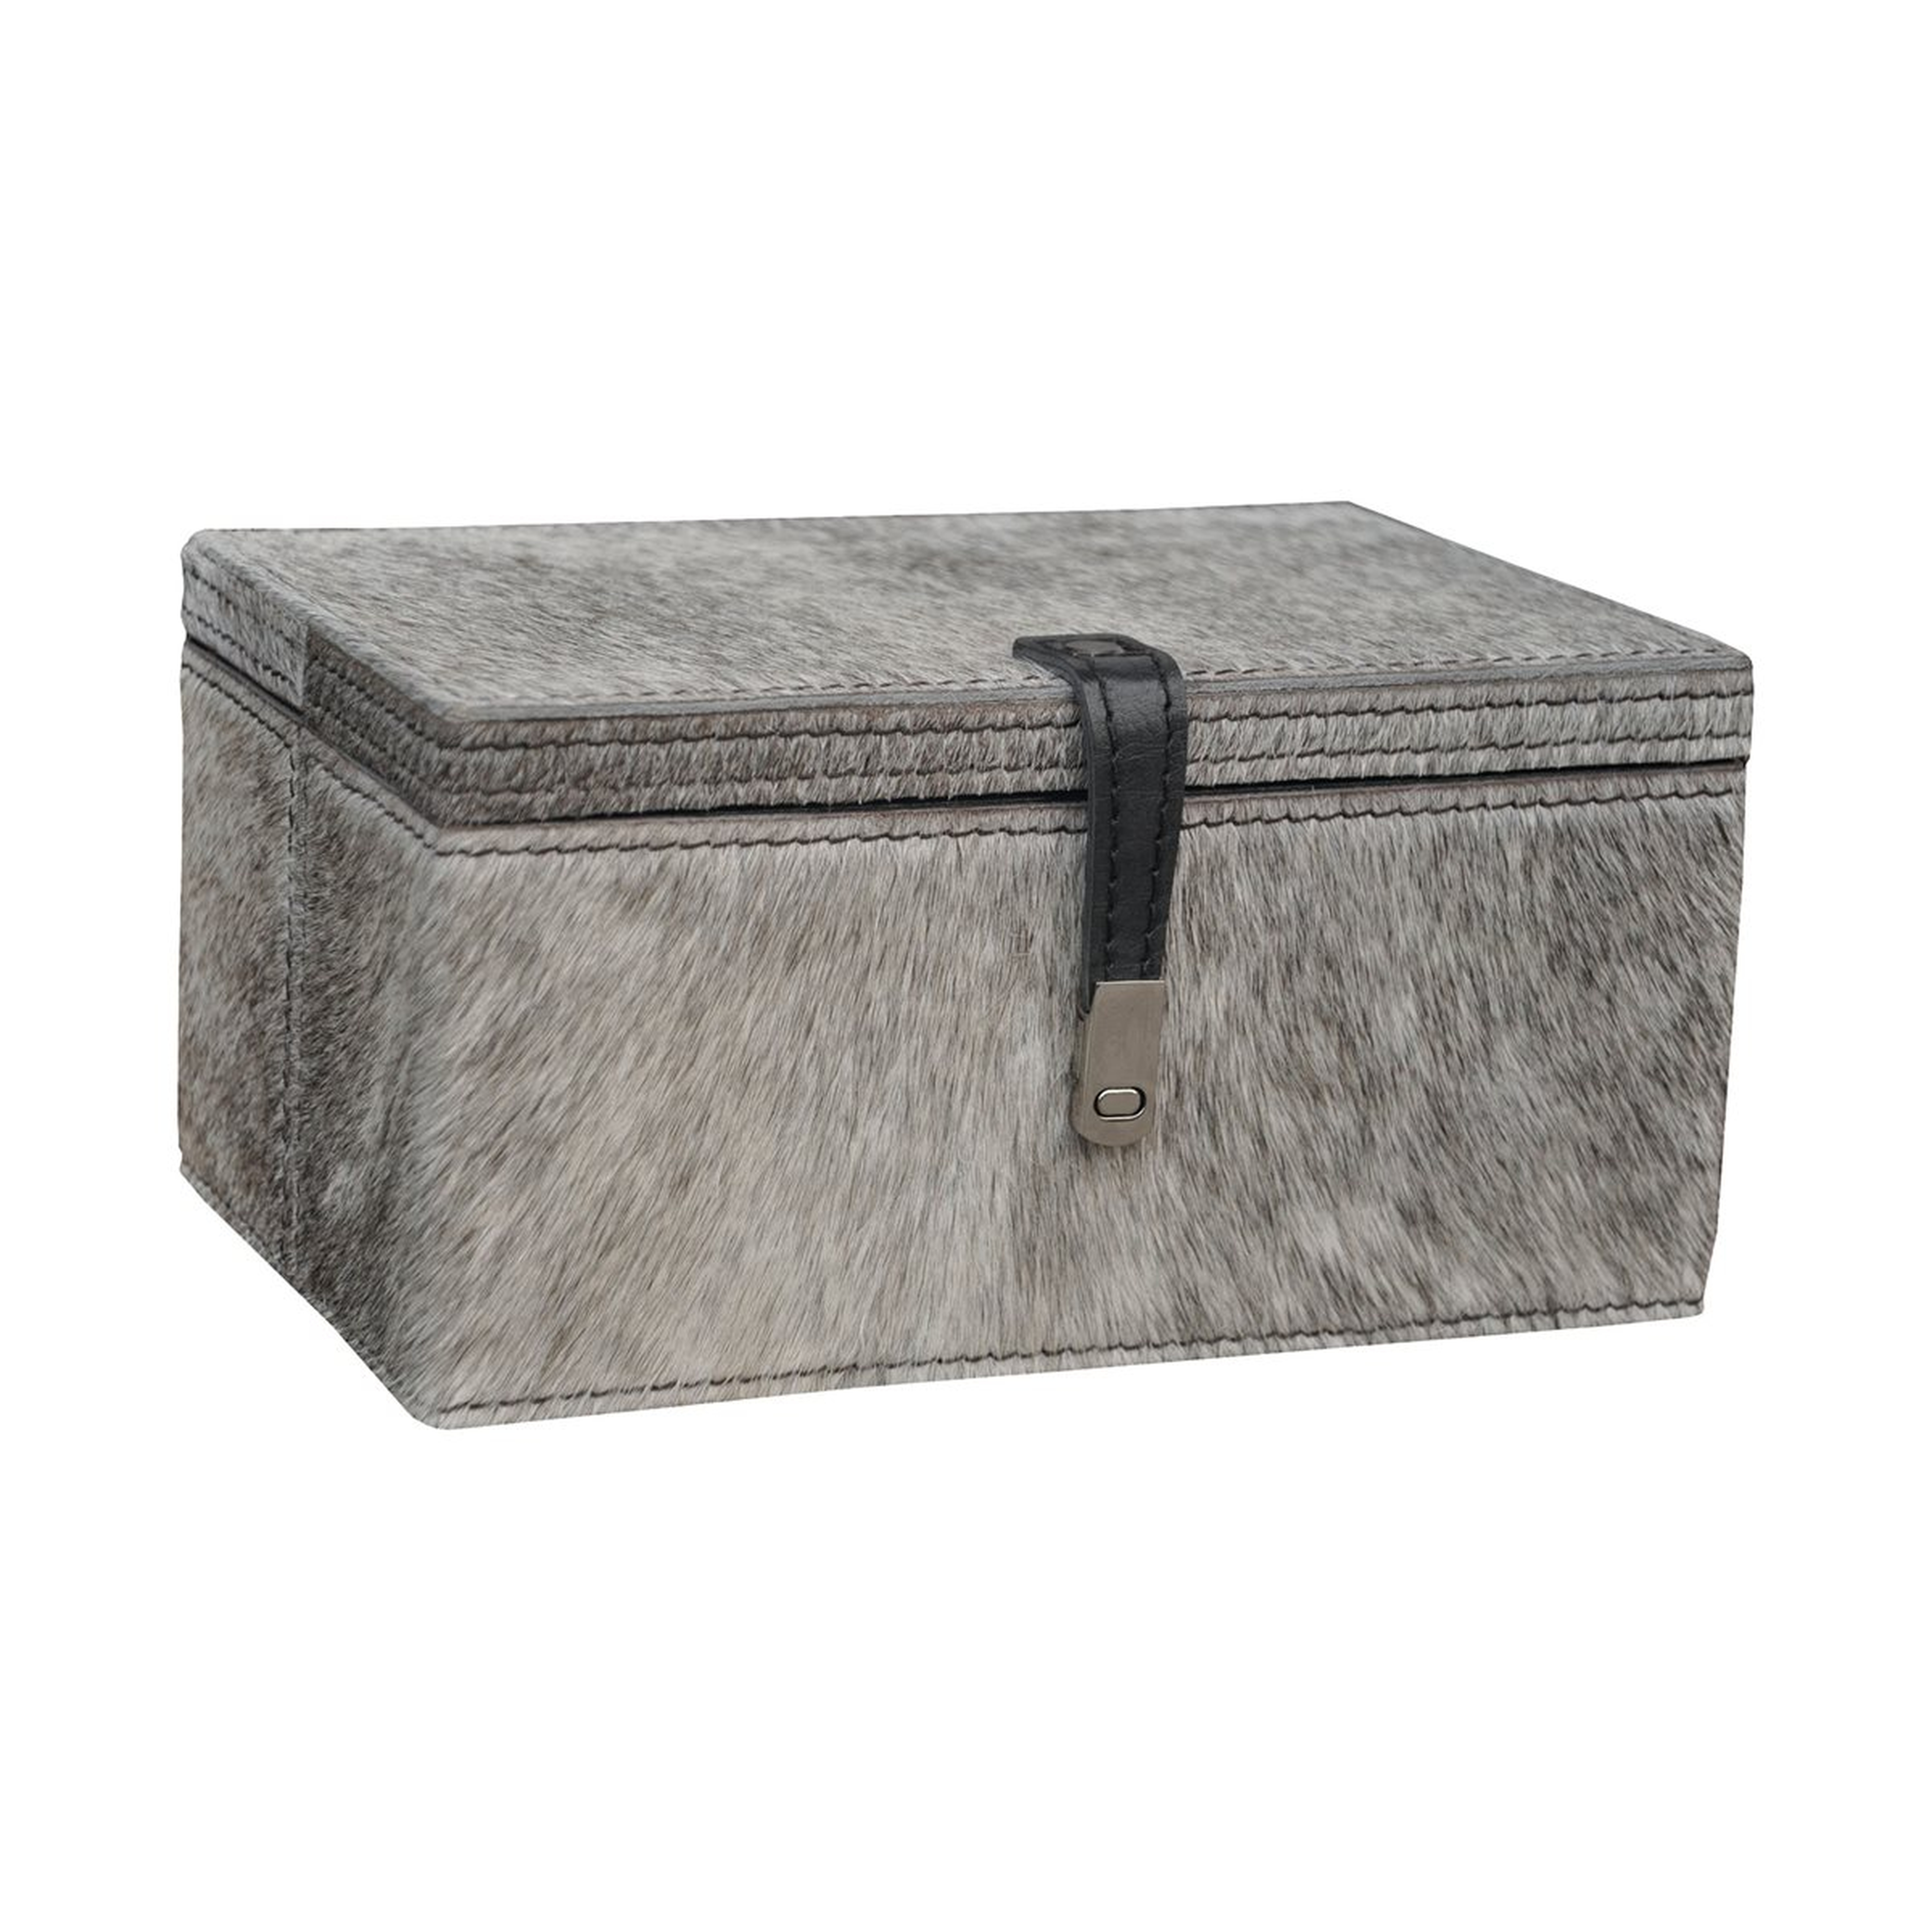 SMALL GREY HAIRON LEATHER BOX - Elk Home